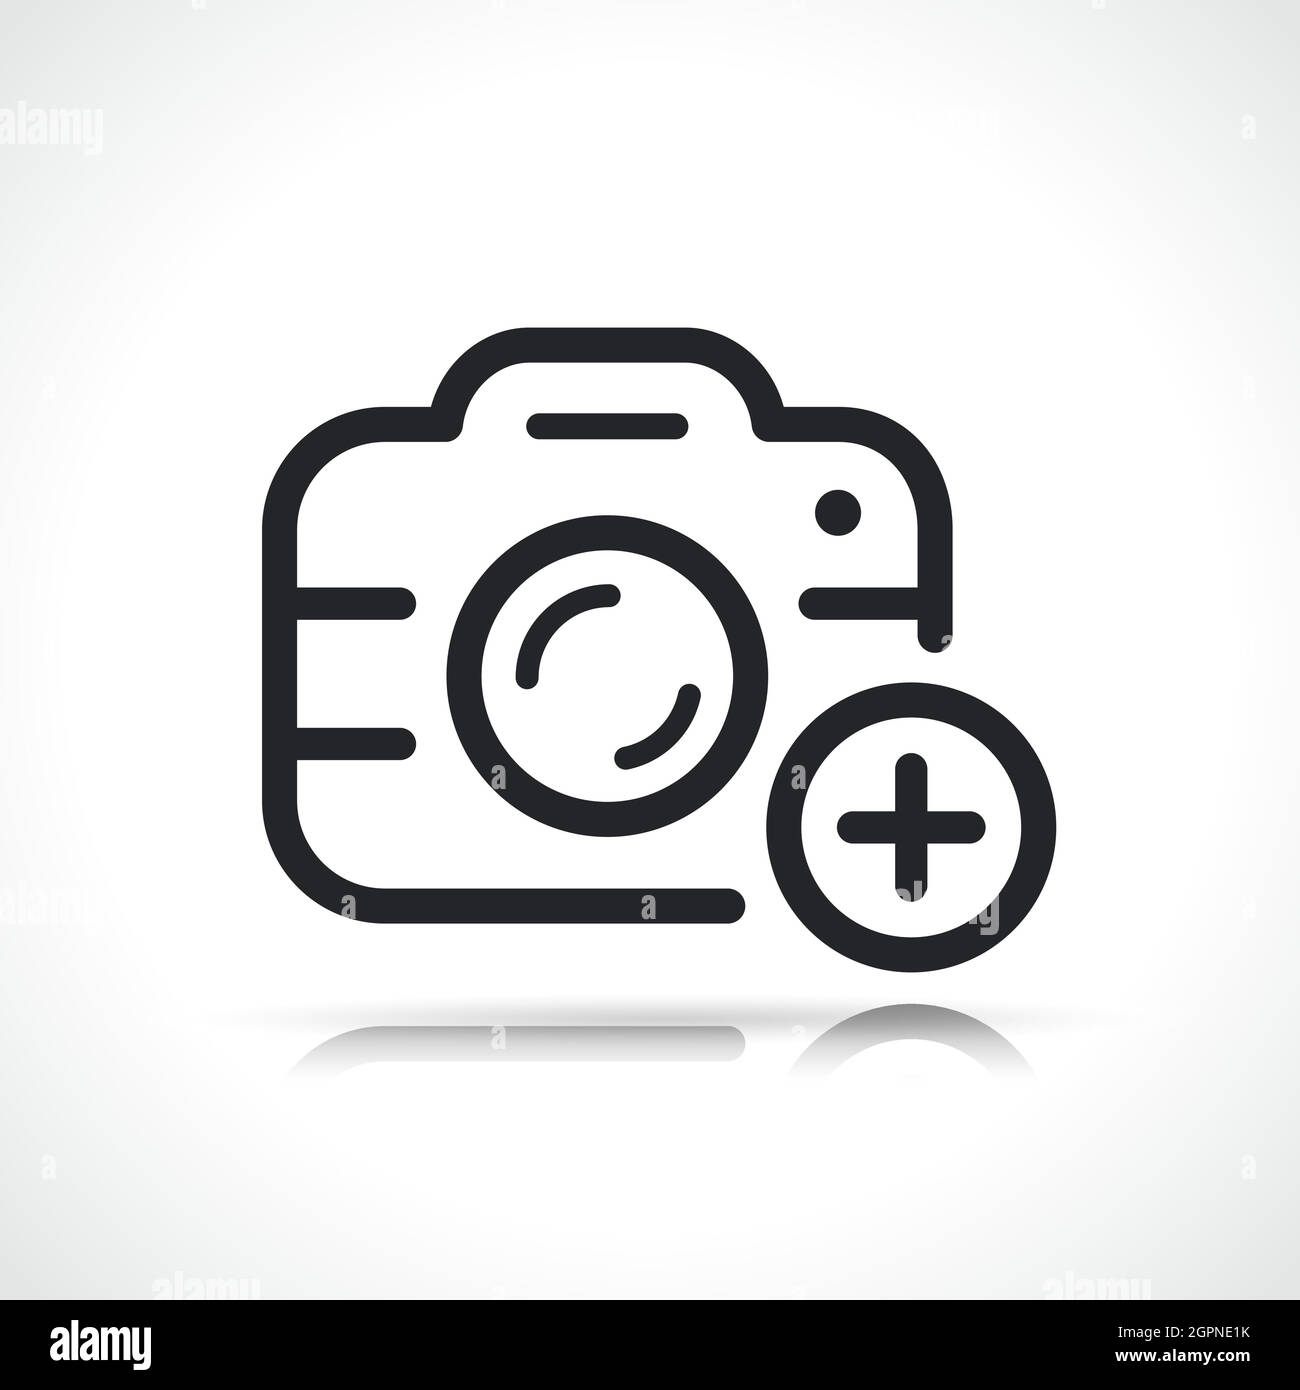 add or upload photo icon Stock Vector